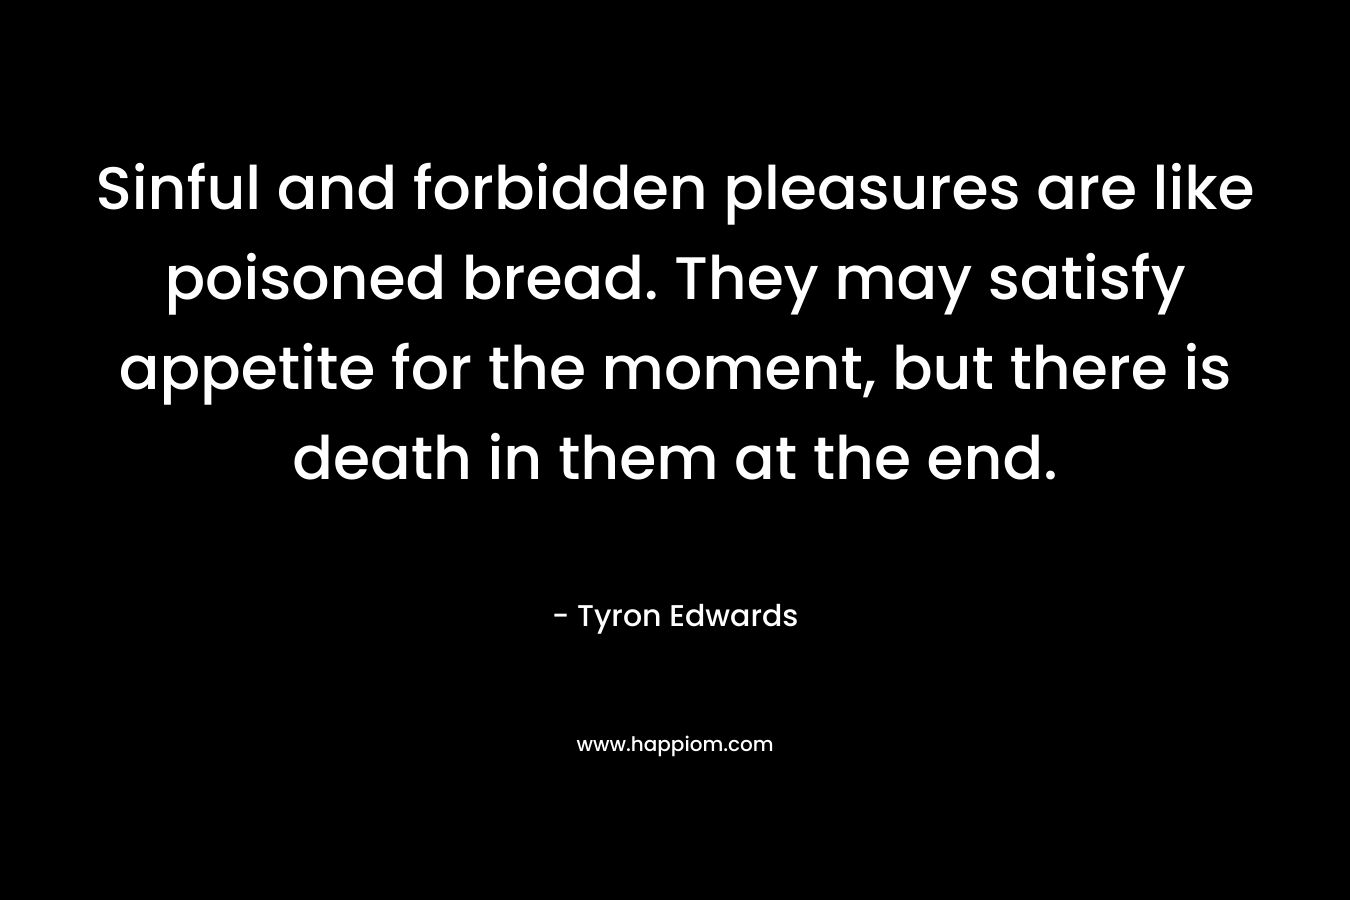 Sinful and forbidden pleasures are like poisoned bread. They may satisfy appetite for the moment, but there is death in them at the end. – Tyron Edwards